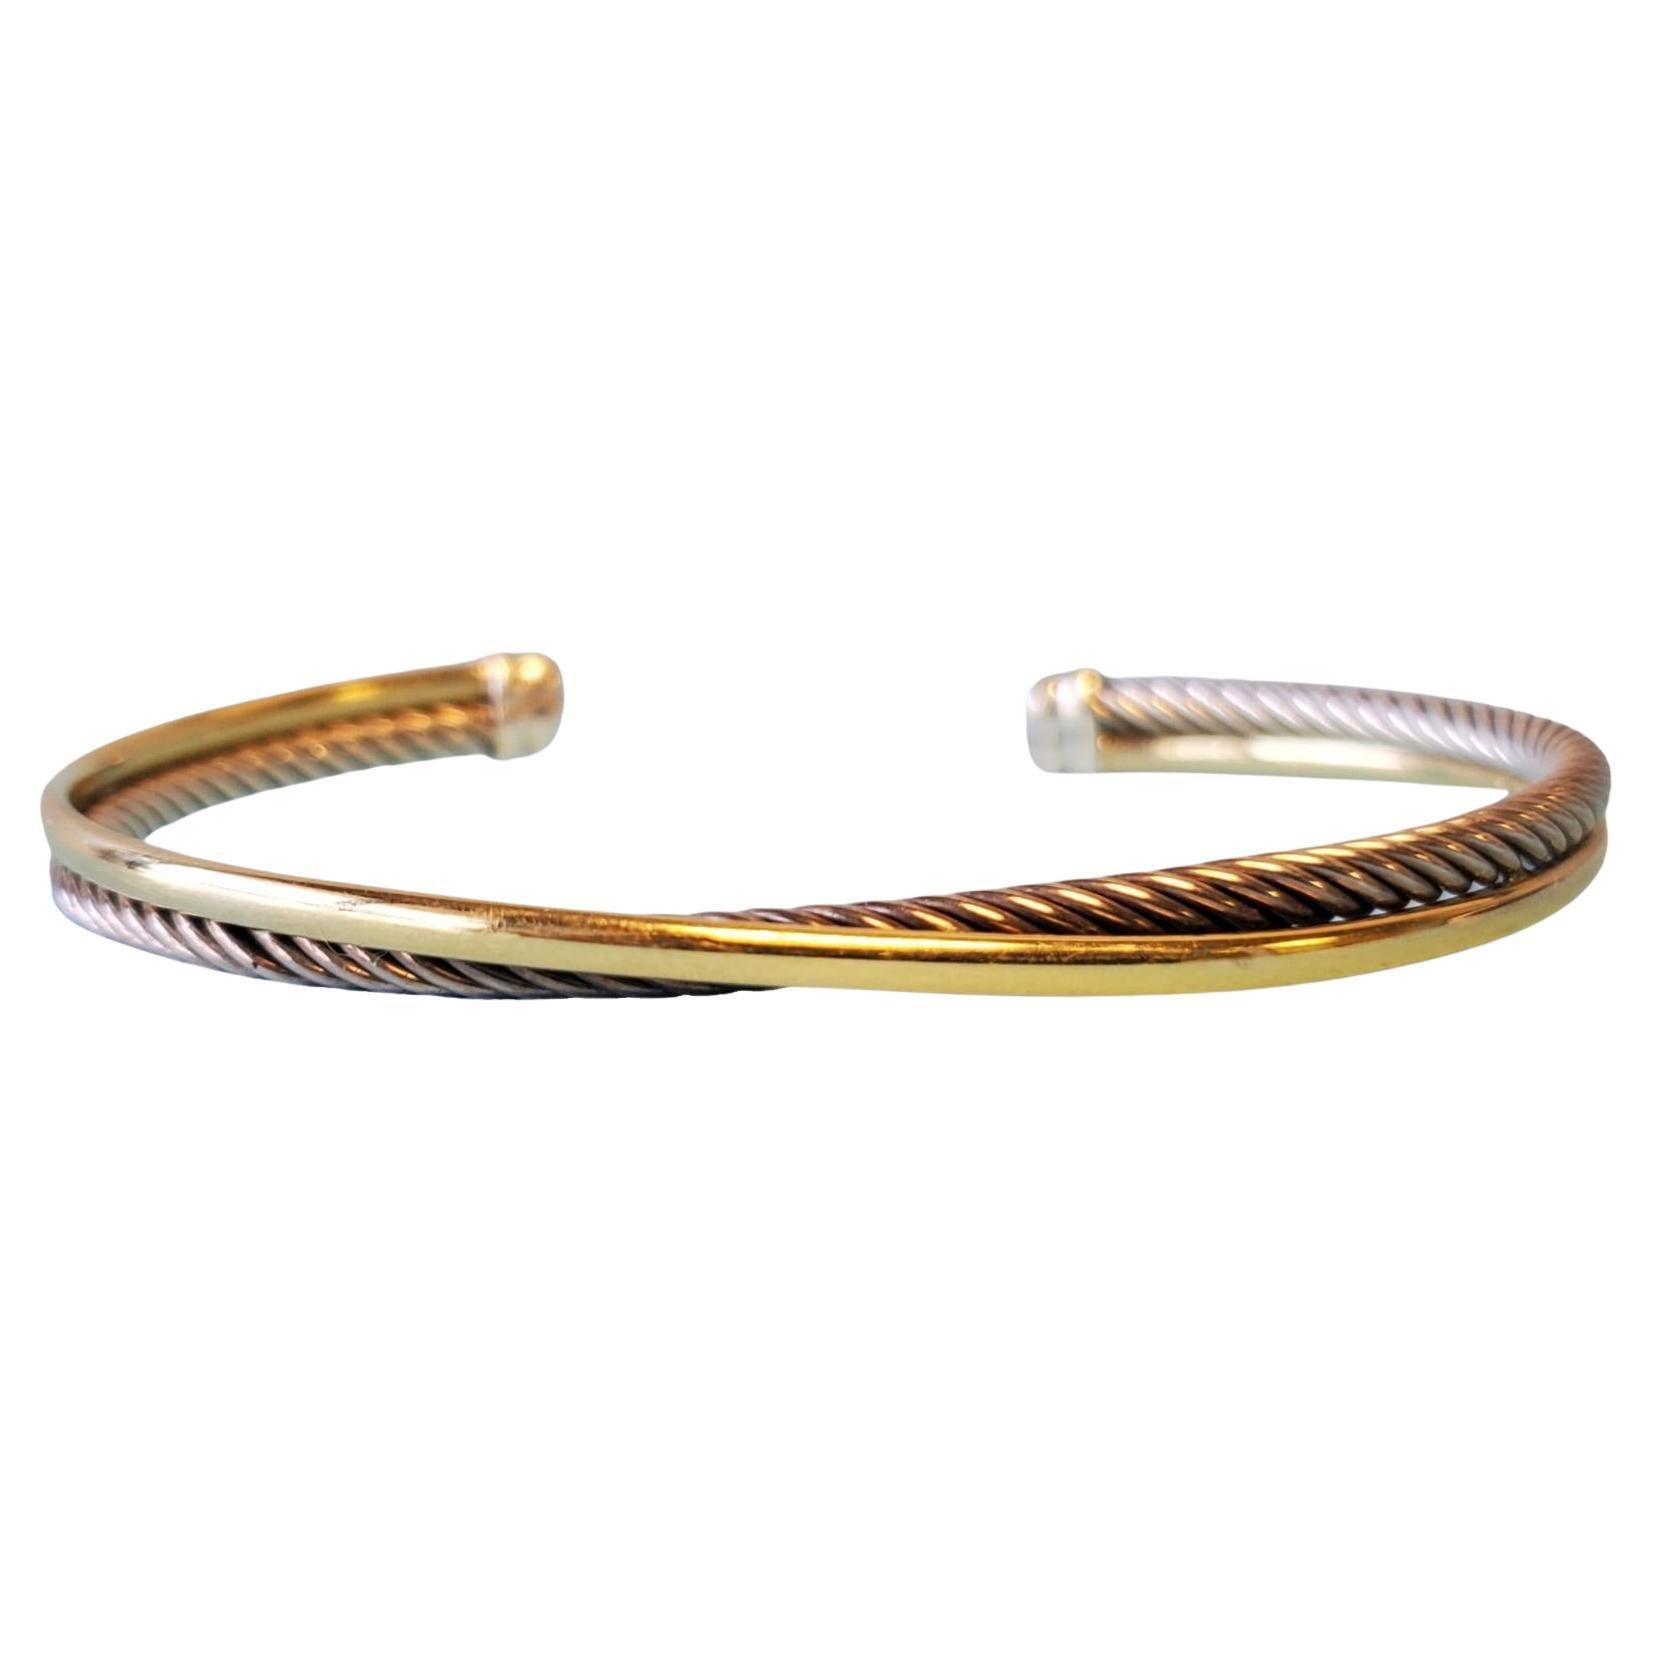 David Yurman Signed Bangle 18k Yellow Gold and Sterling Braided Bracelet For Sale